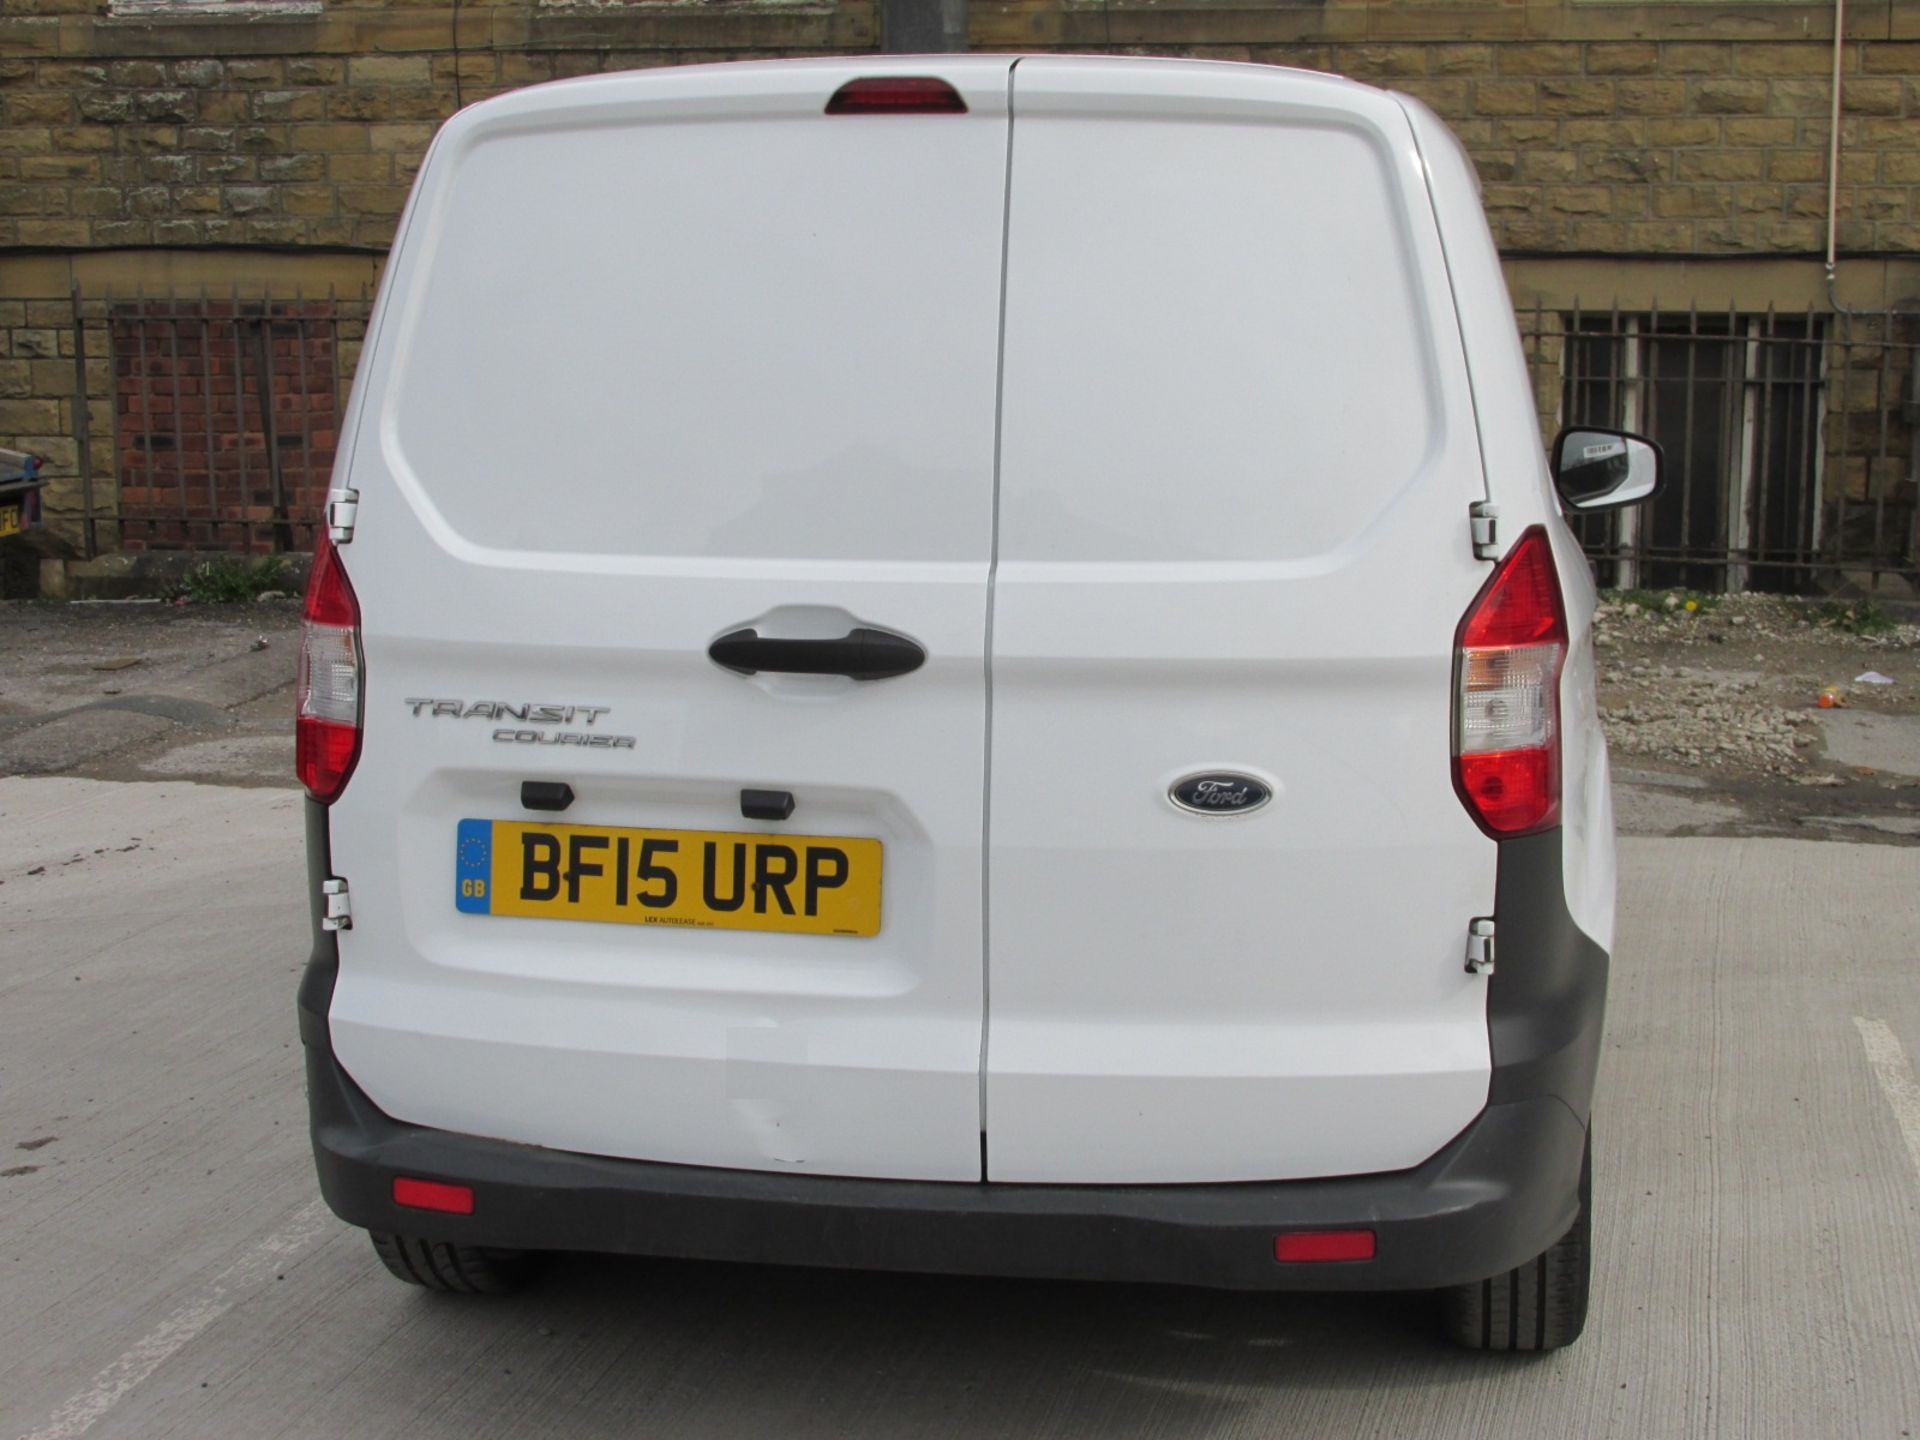 2015 Ford Transit Courier 1.5 TDCi Panel Van - 1 PLC Owner from New - FSH - Long MOT - Image 5 of 10